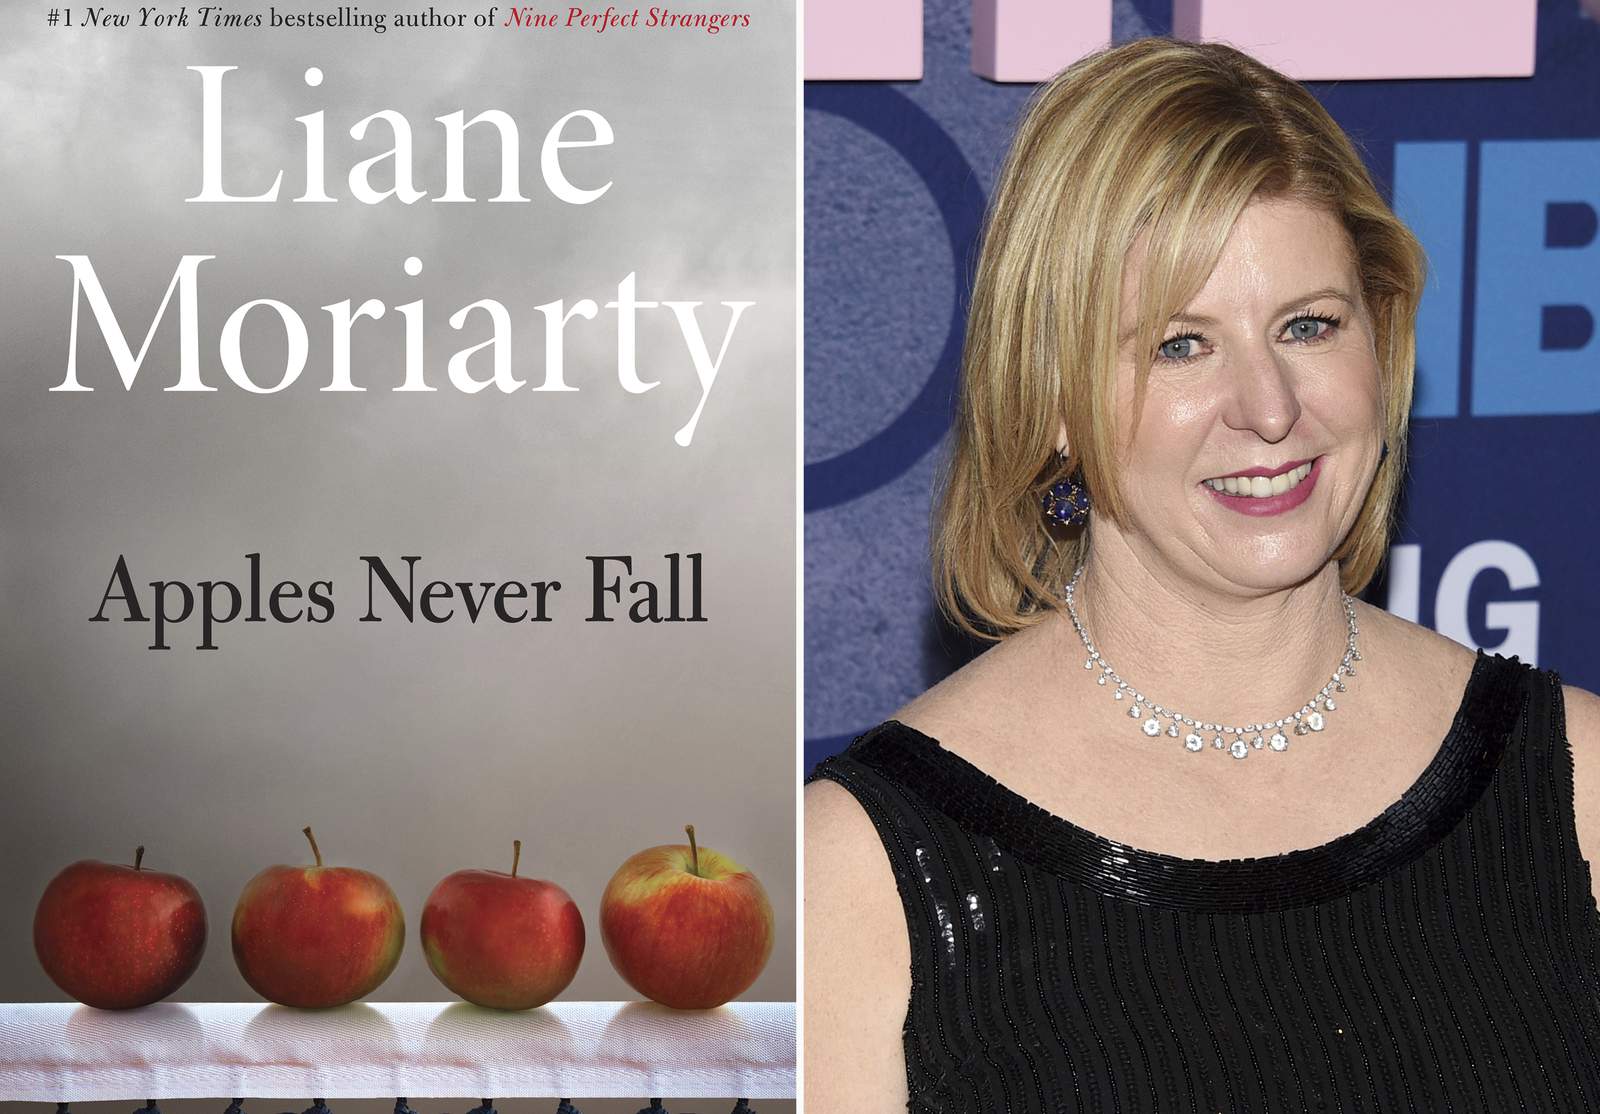 ‘Big Little Lies’ author has new novel out in September